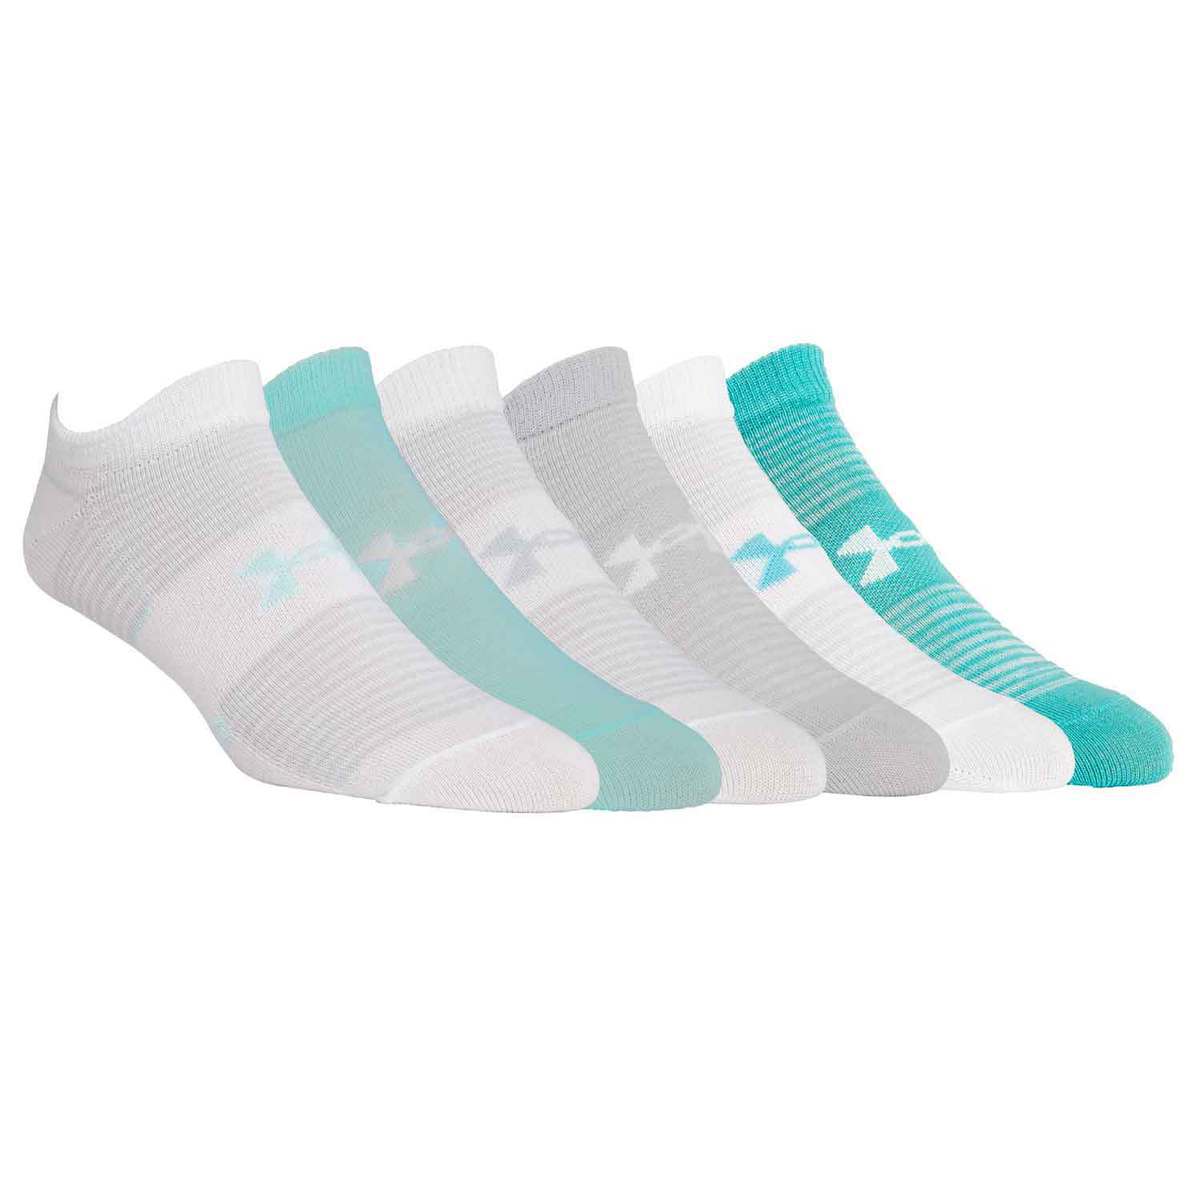 Under Armour Women's Essentials 6 Pack Casual Socks | Sportsman's Warehouse